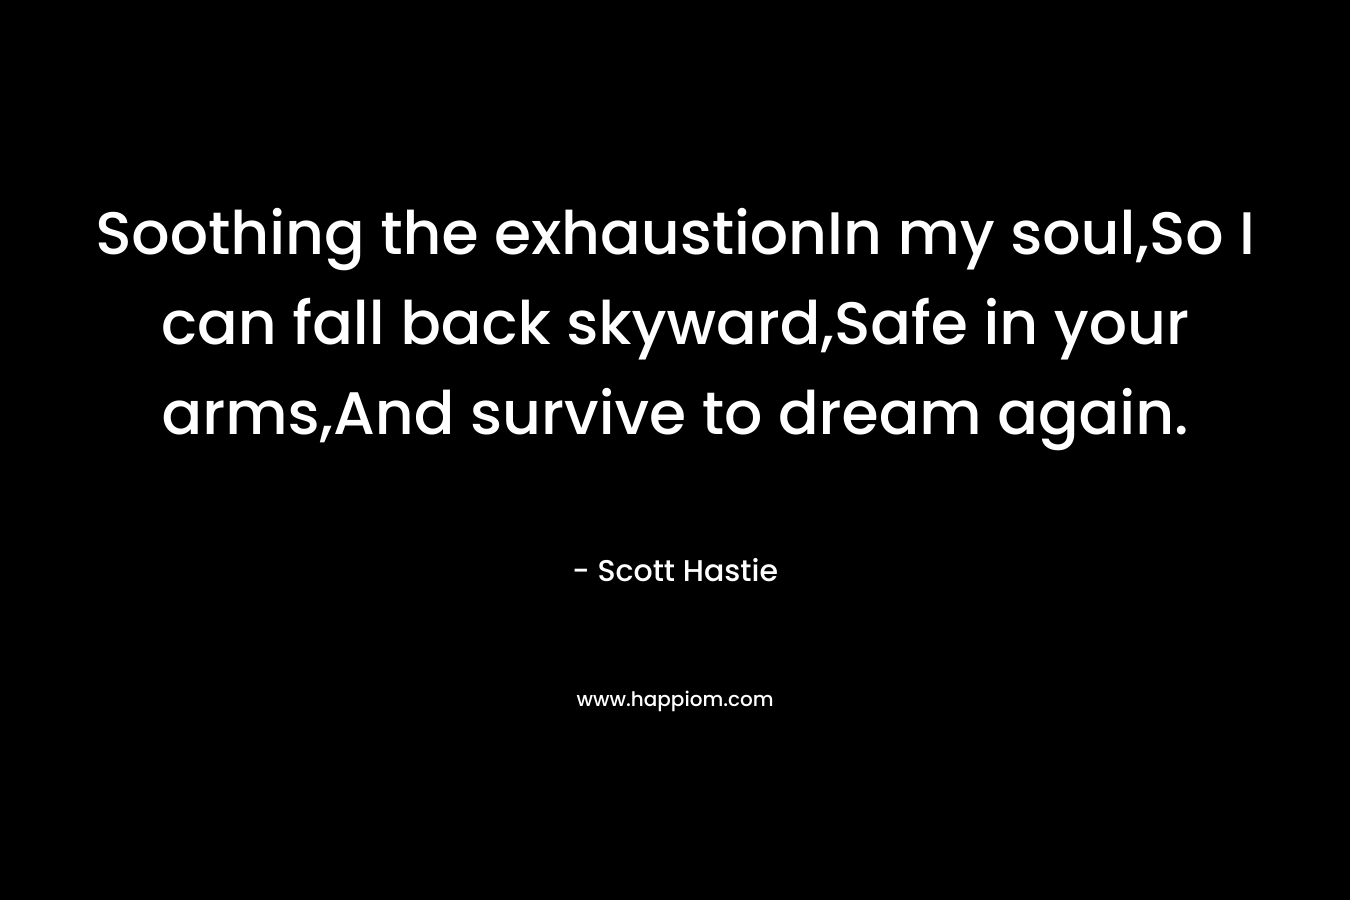 Soothing the exhaustionIn my soul,So I can fall back skyward,Safe in your arms,And survive to dream again. – Scott Hastie